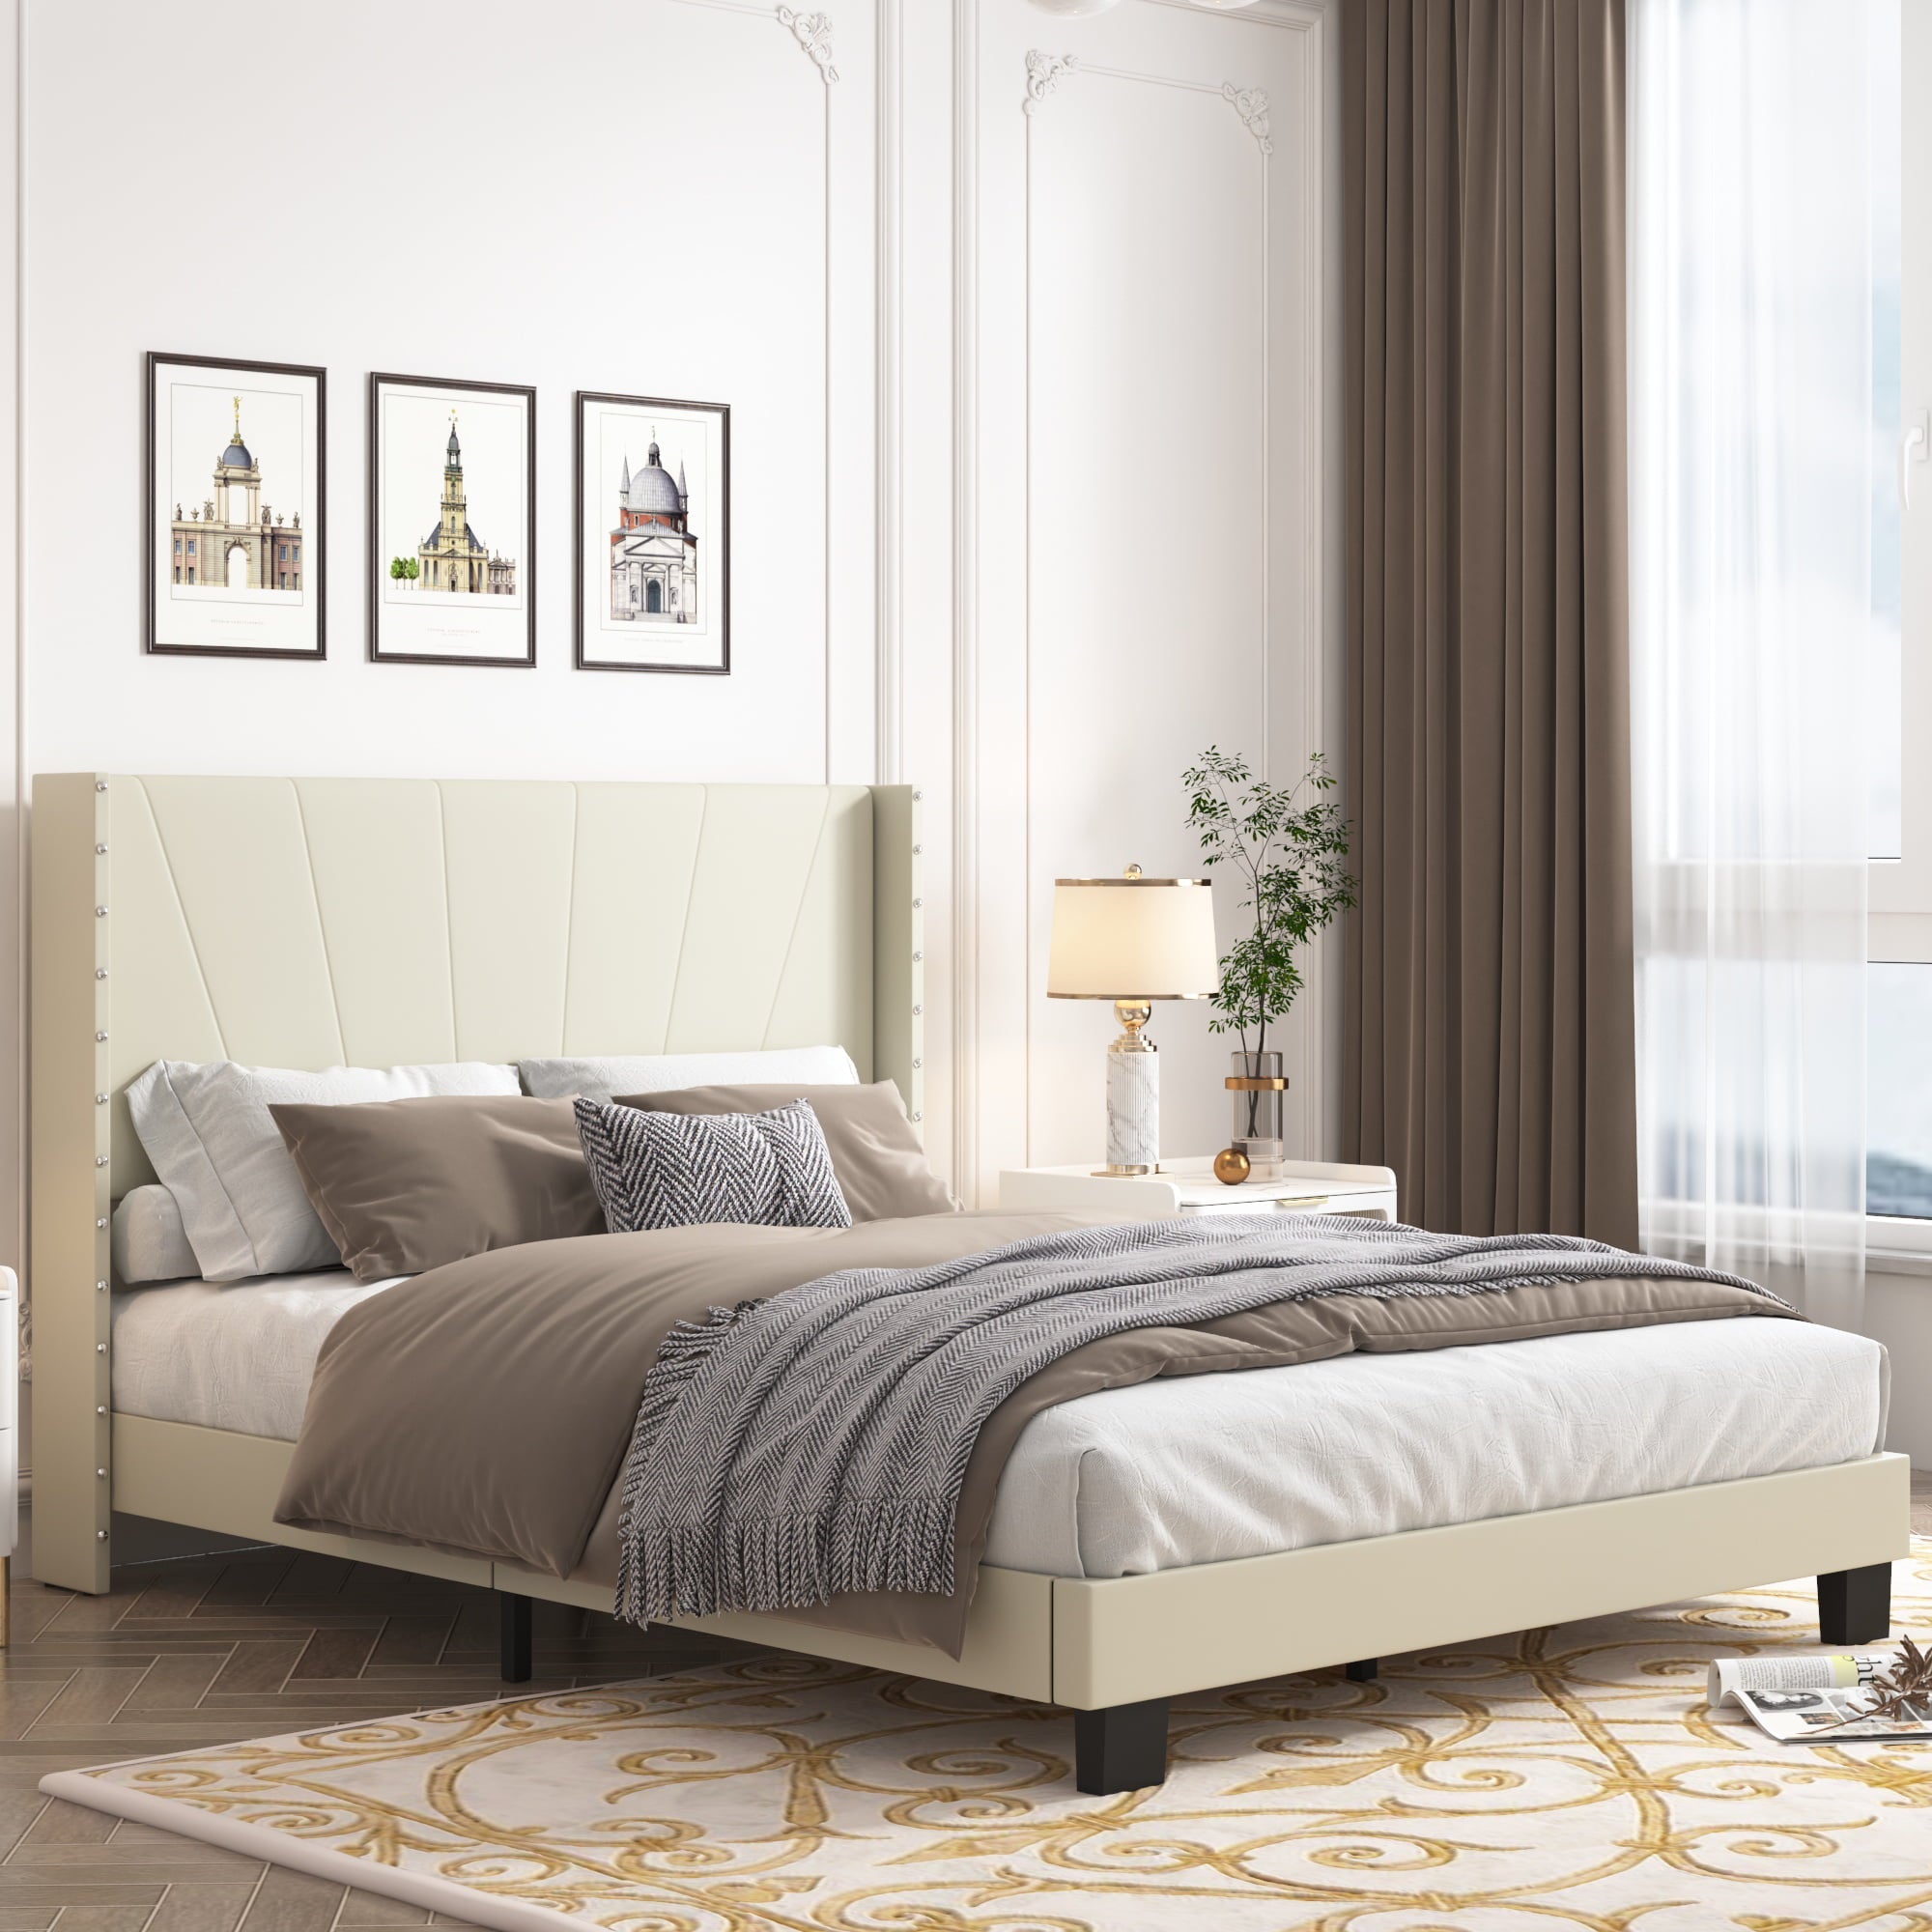 uhomepro Beige Full Bed Frame for Adults Kids, Modern Fabric Upholstered Platform Bed Frame with Headboard, Full Size Bed Frame Bedroom Furniture with Wood Slats Support, No Box Spring Needed